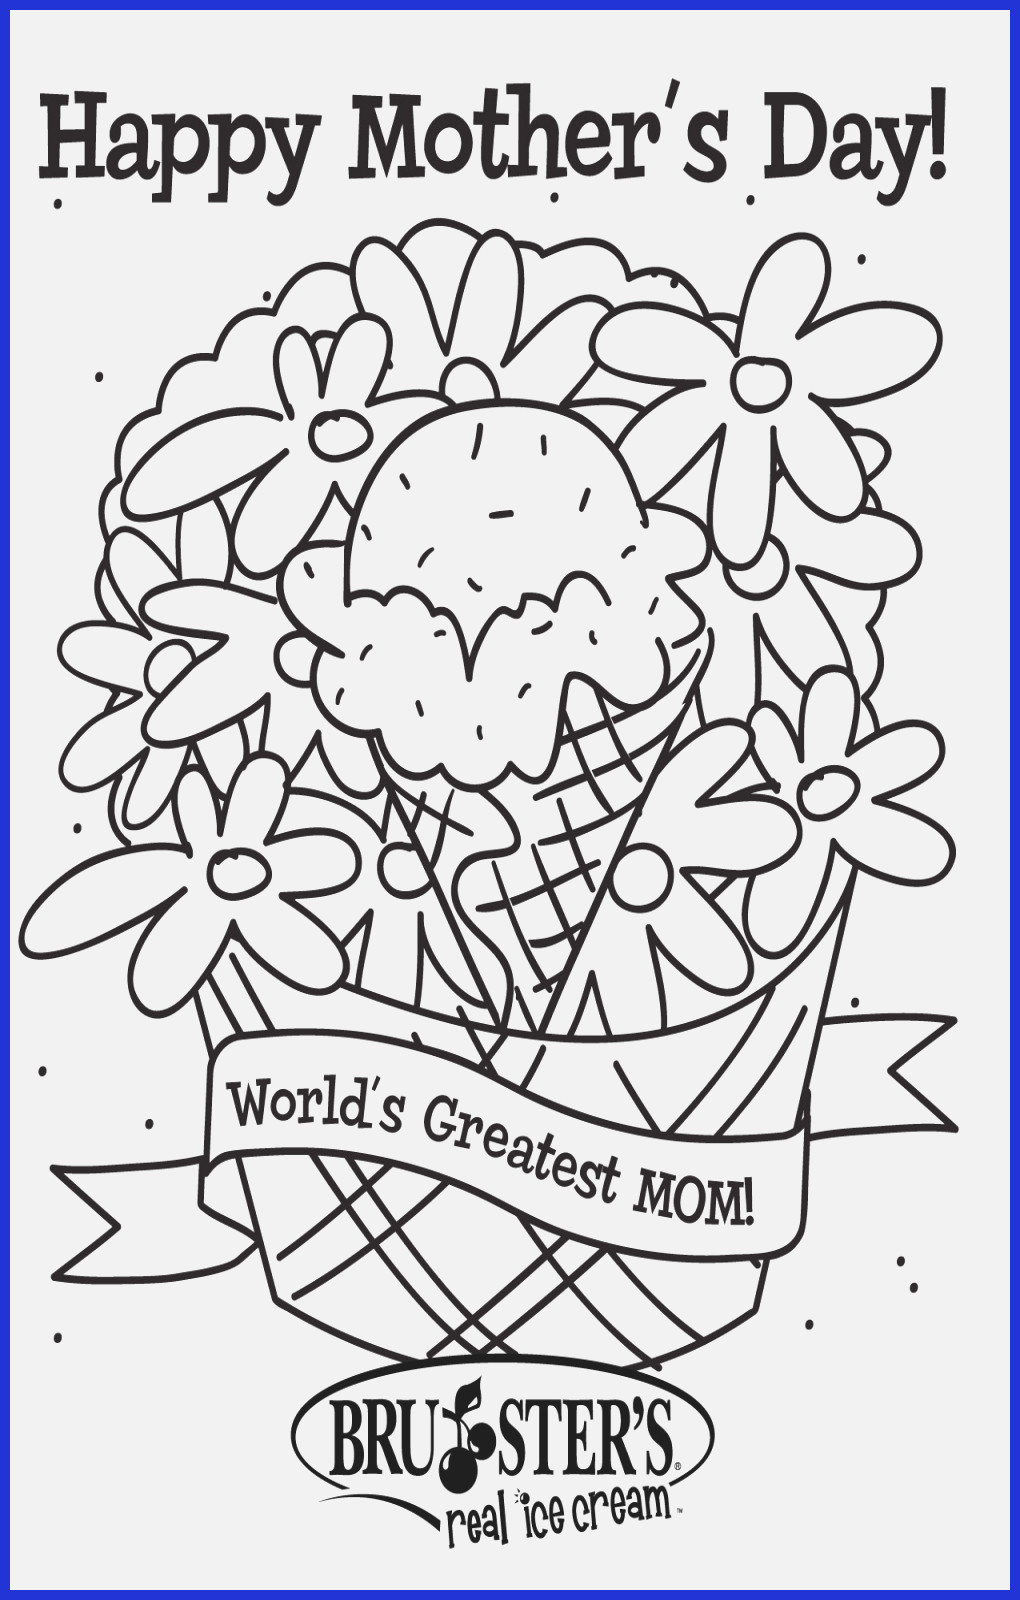 Free Mother's Day Coloring Pages Coloring Ideas Excelent Mothers Day Coloring Pages Photo Ideas